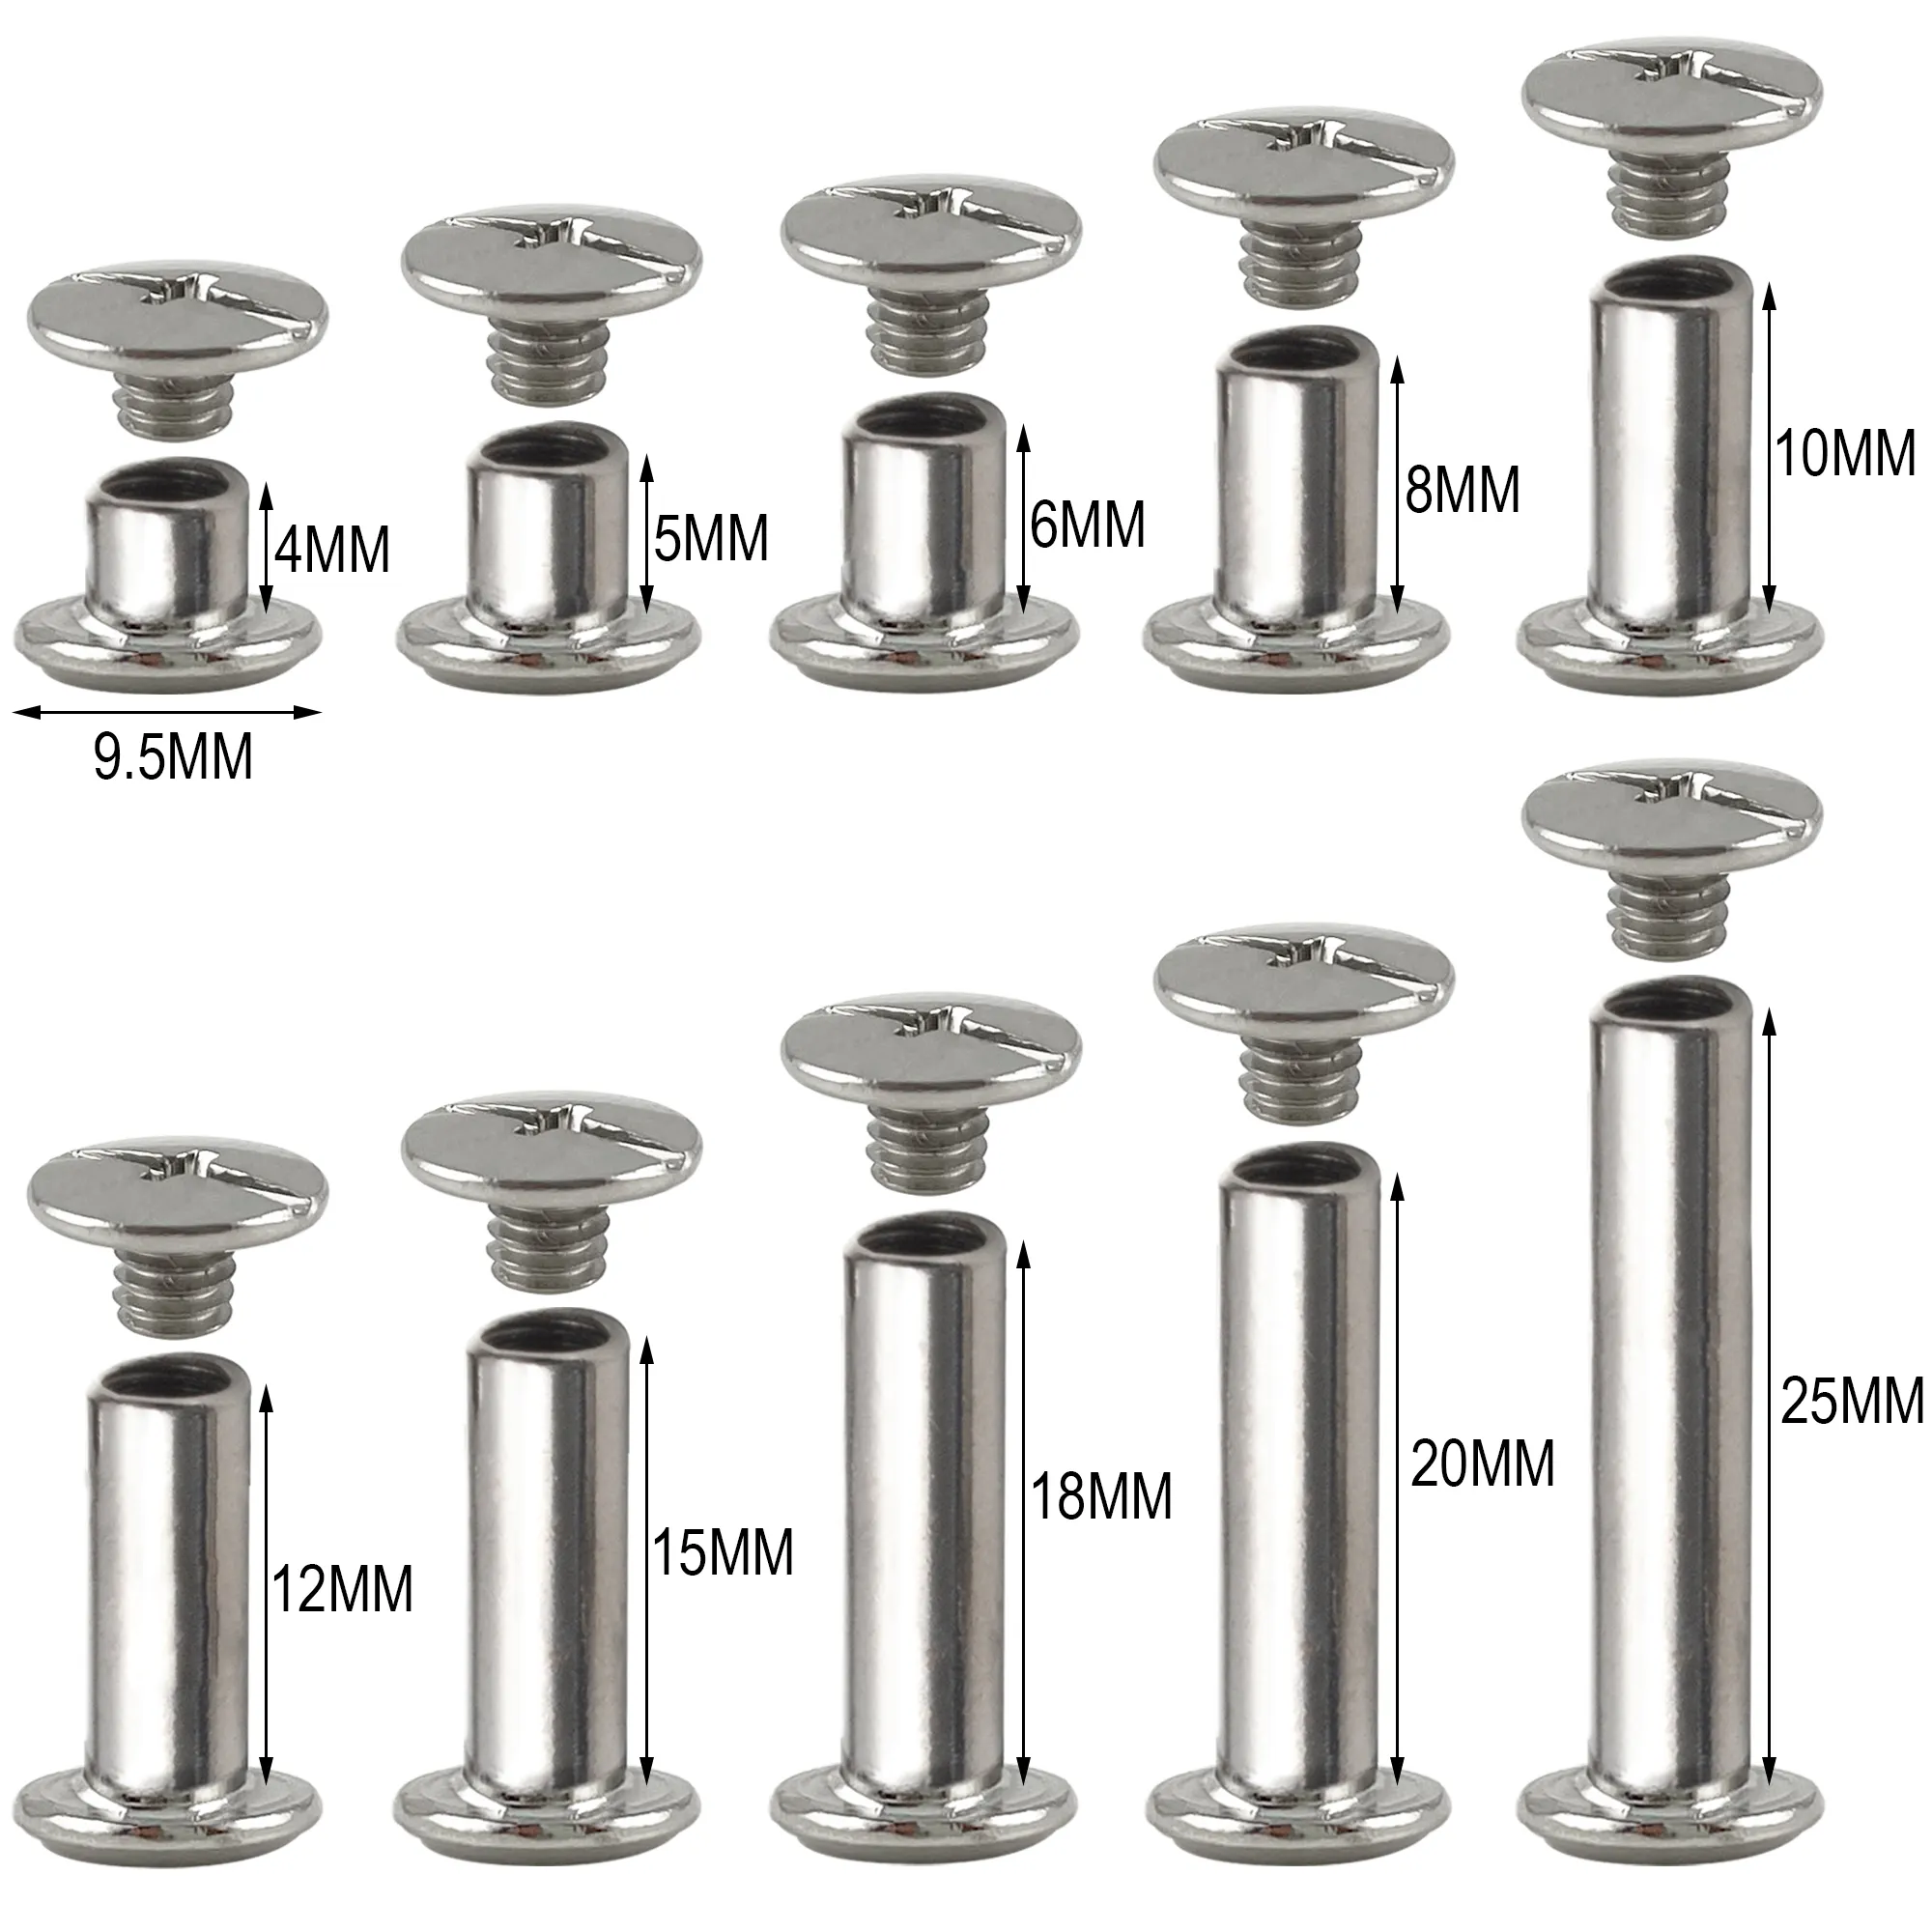 OEM Chicago Screws Countersunk Head Sex Bolt Binding Post Rivet Stainless Steel Male and Female Screw Chicago Screws for Leather